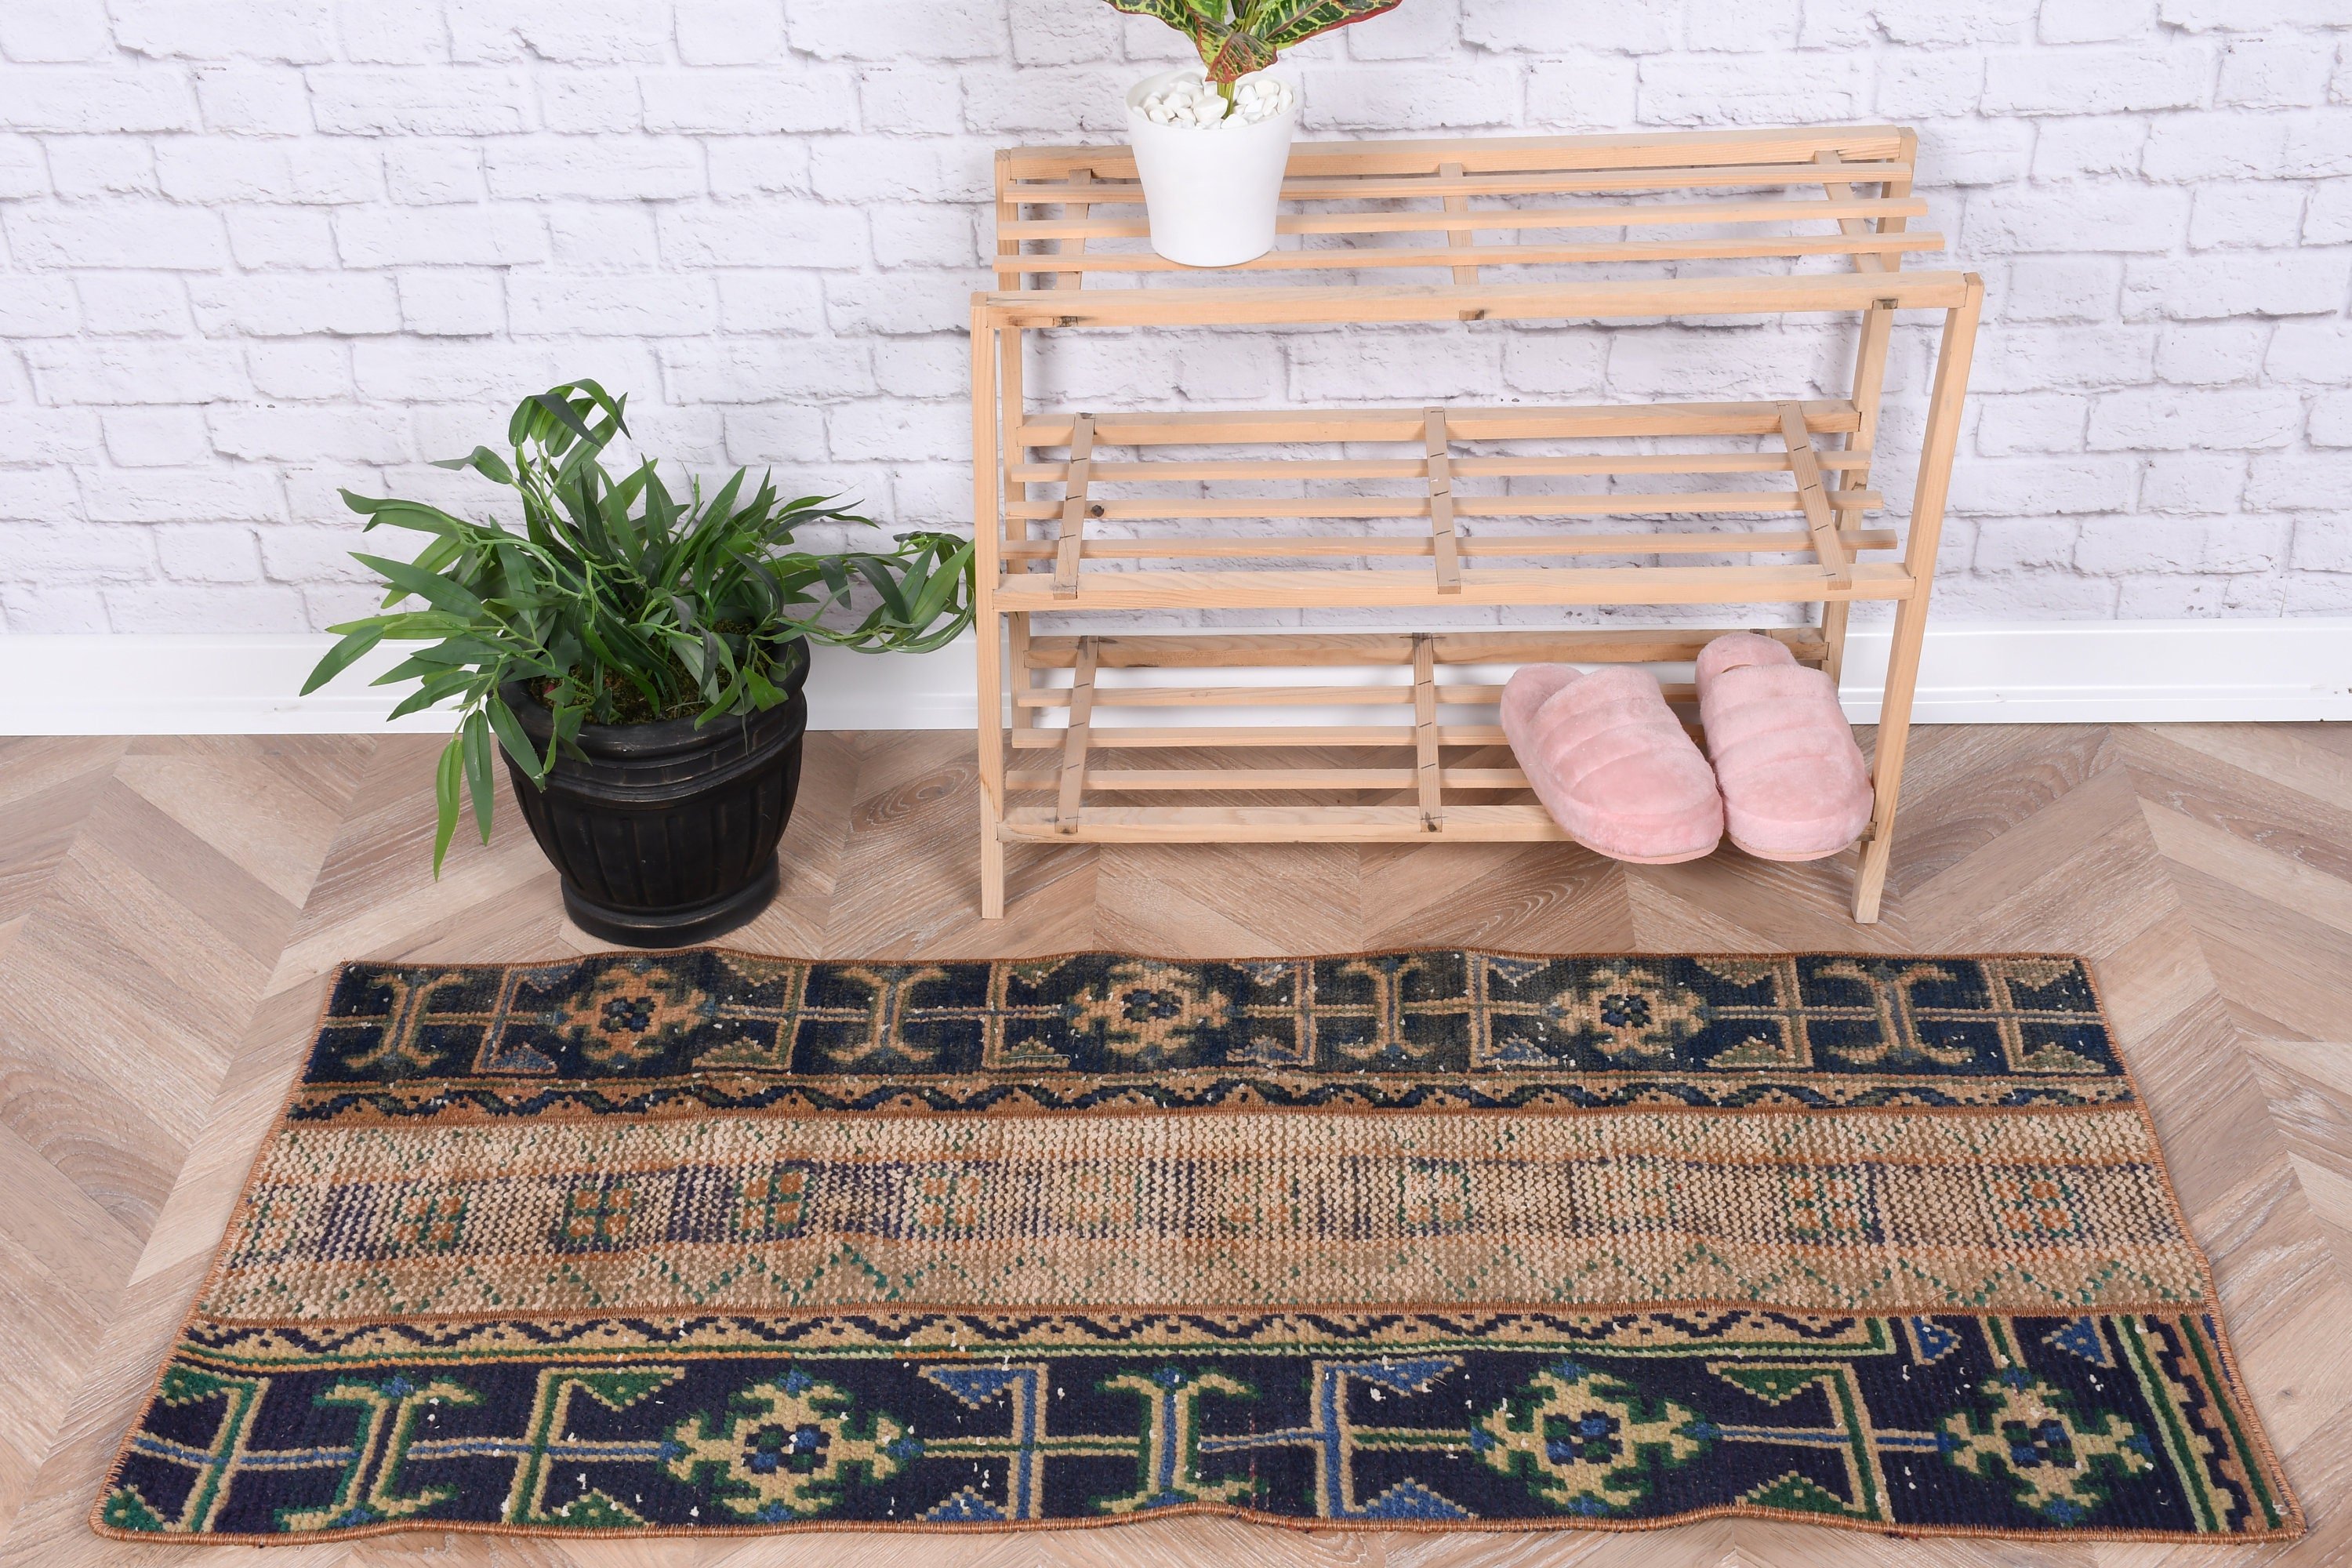 Vintage Rug, Moroccan Rugs, Bedroom Rug, Turkish Rugs, Rugs for Bedroom, Cool Rugs, 1.7x4 ft Small Rugs, Kitchen Rugs, Green Cool Rug